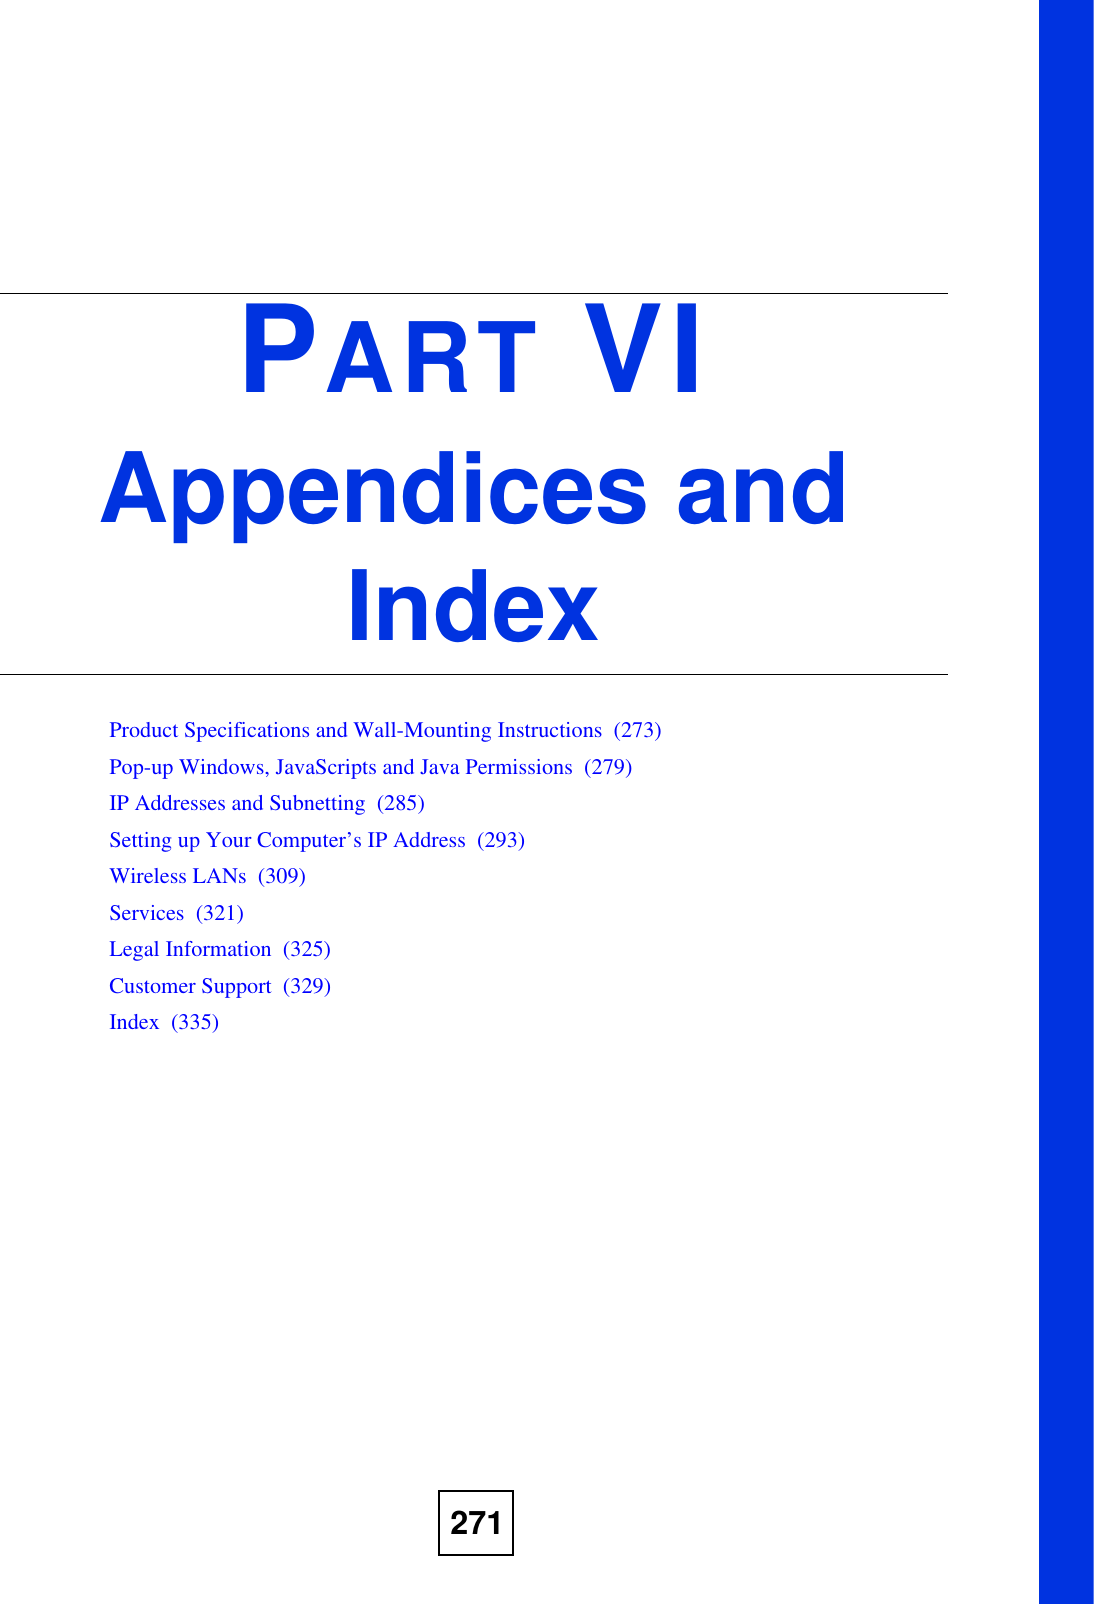 271PART VIAppendices and IndexProduct Specifications and Wall-Mounting Instructions  (273)Pop-up Windows, JavaScripts and Java Permissions  (279)IP Addresses and Subnetting  (285)Setting up Your Computer’s IP Address  (293)Wireless LANs  (309)Services  (321)Legal Information  (325)Customer Support  (329)Index  (335)